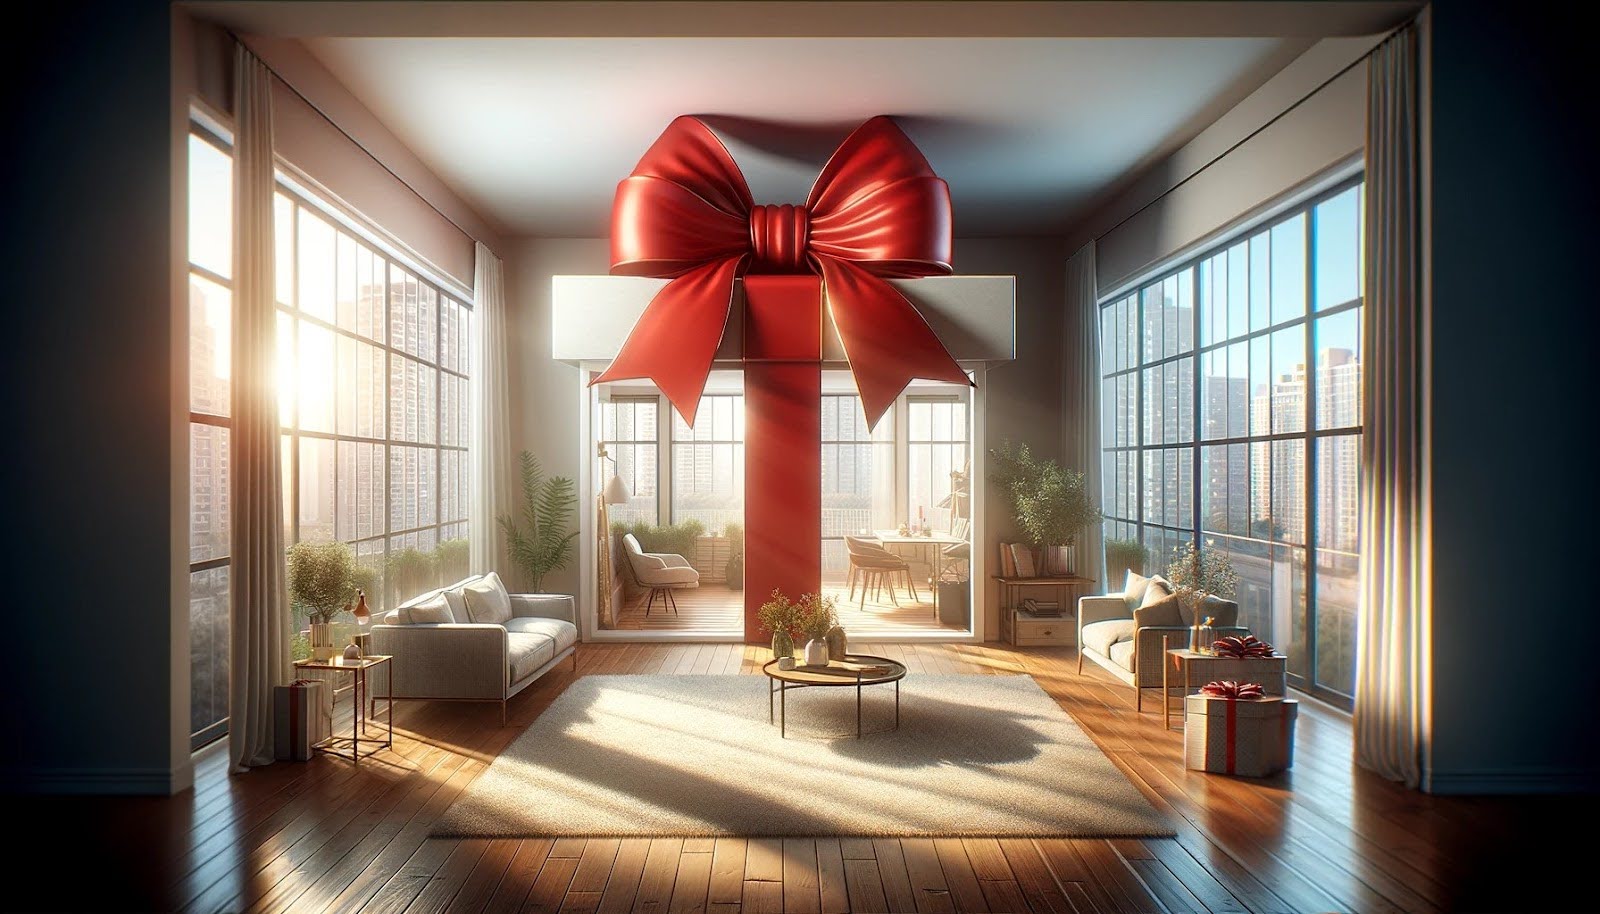 Real estate is the best gift